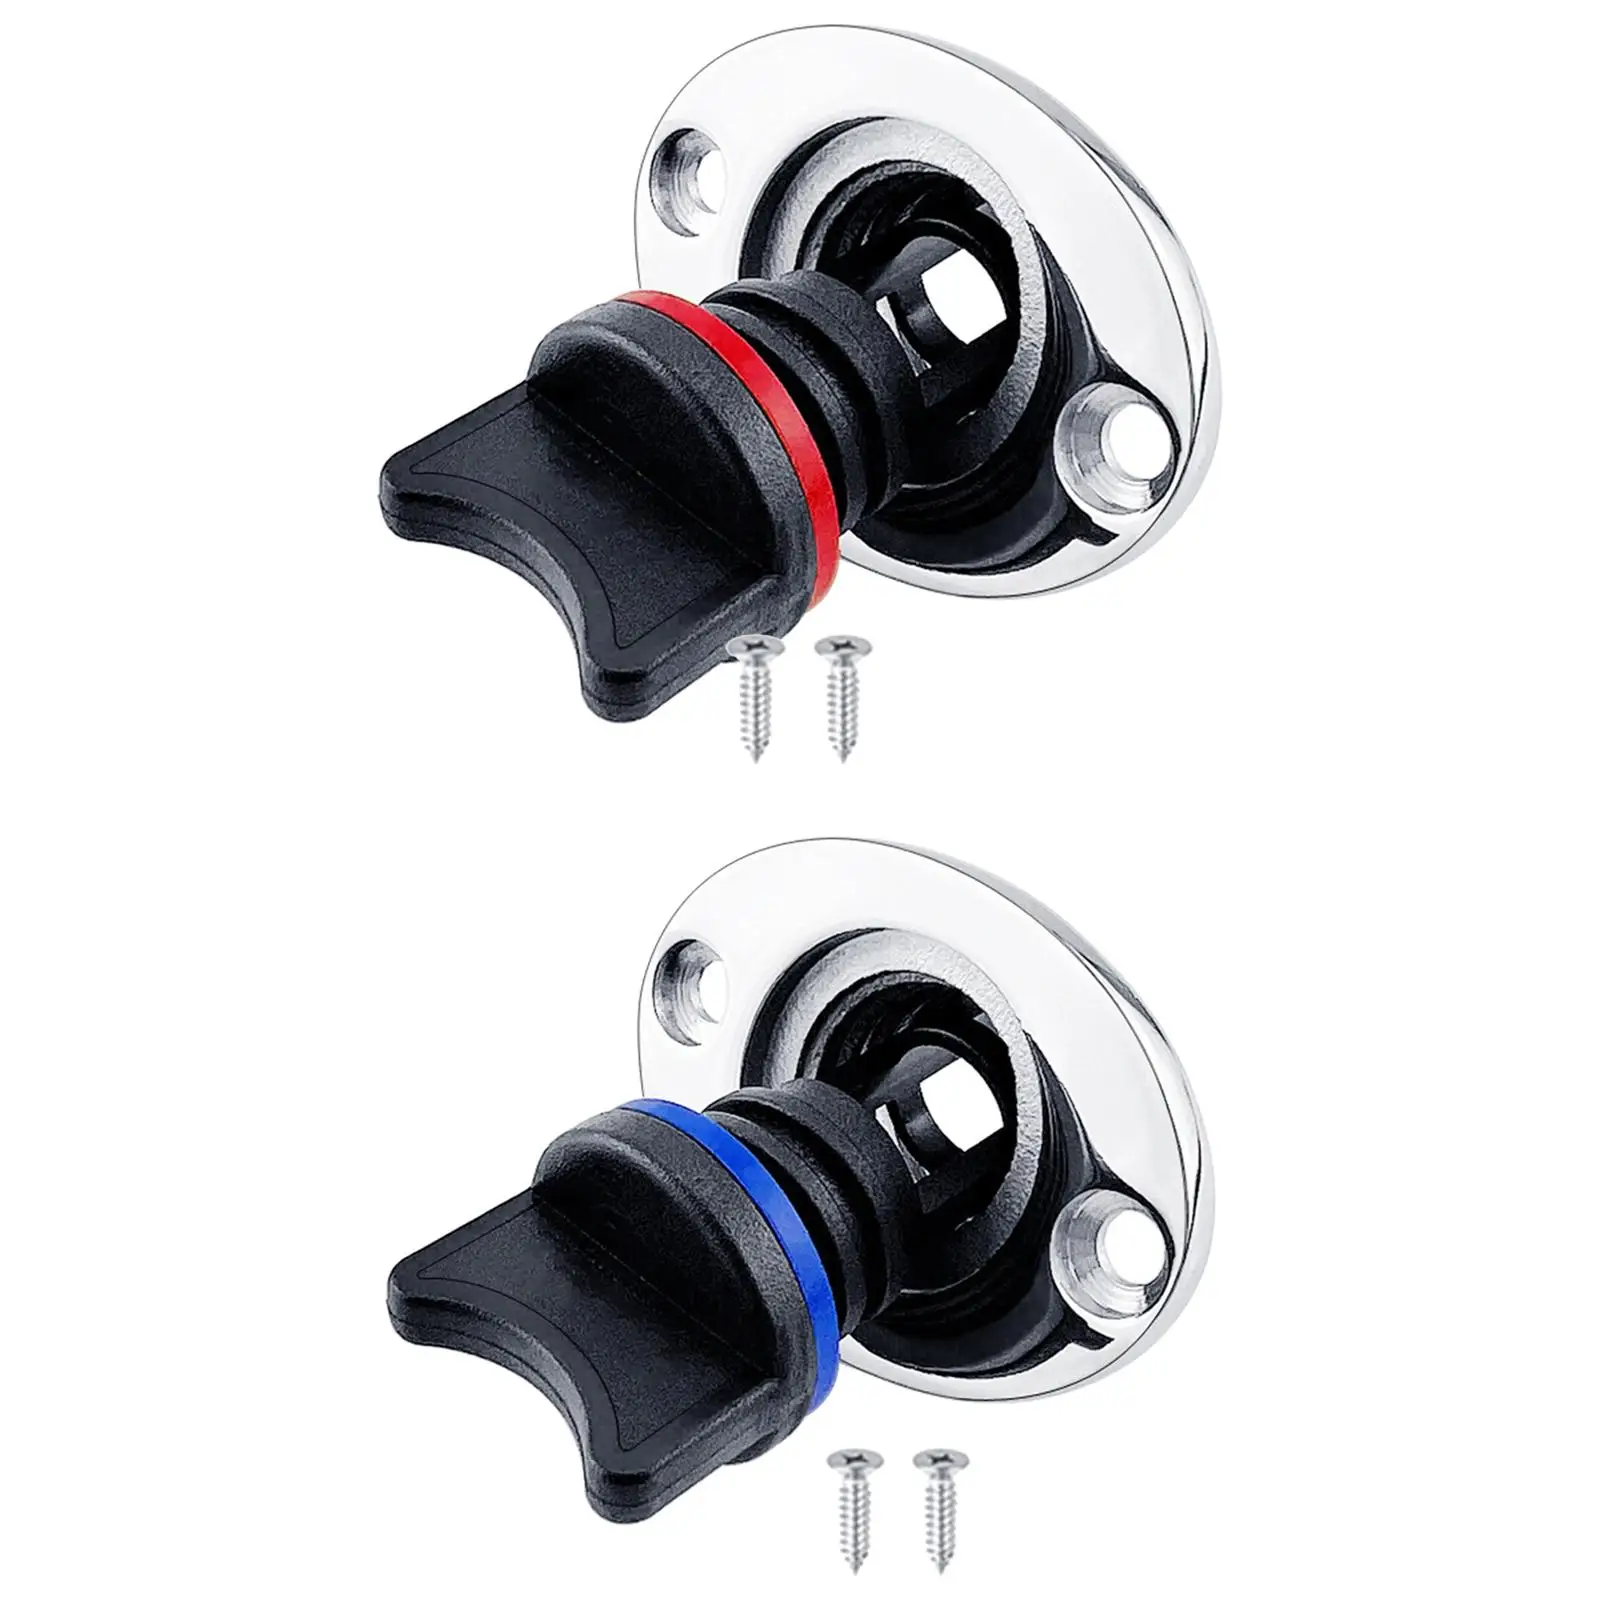 Boat Drain Plug Replacement Transom Hull Drain for 25mm 1`` Hole `` Thread Marine Boat Yacht Kayak Canoe Accessory